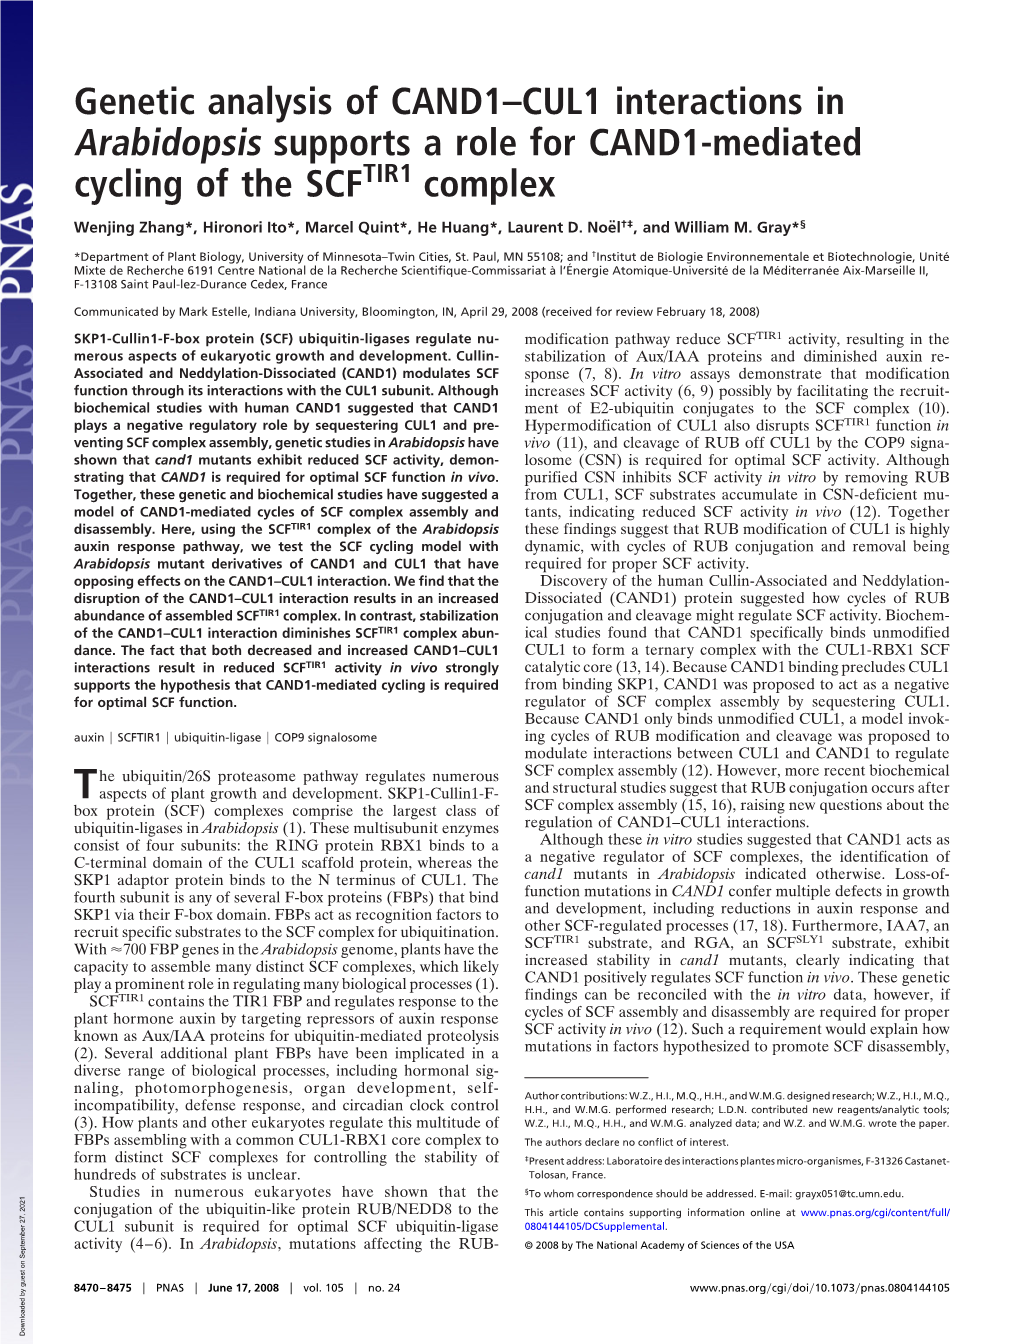 Genetic Analysis of CAND1–CUL1 Interactions in Arabidopsis Supports a Role for CAND1-Mediated Cycling of the SCFTIR1 Complex